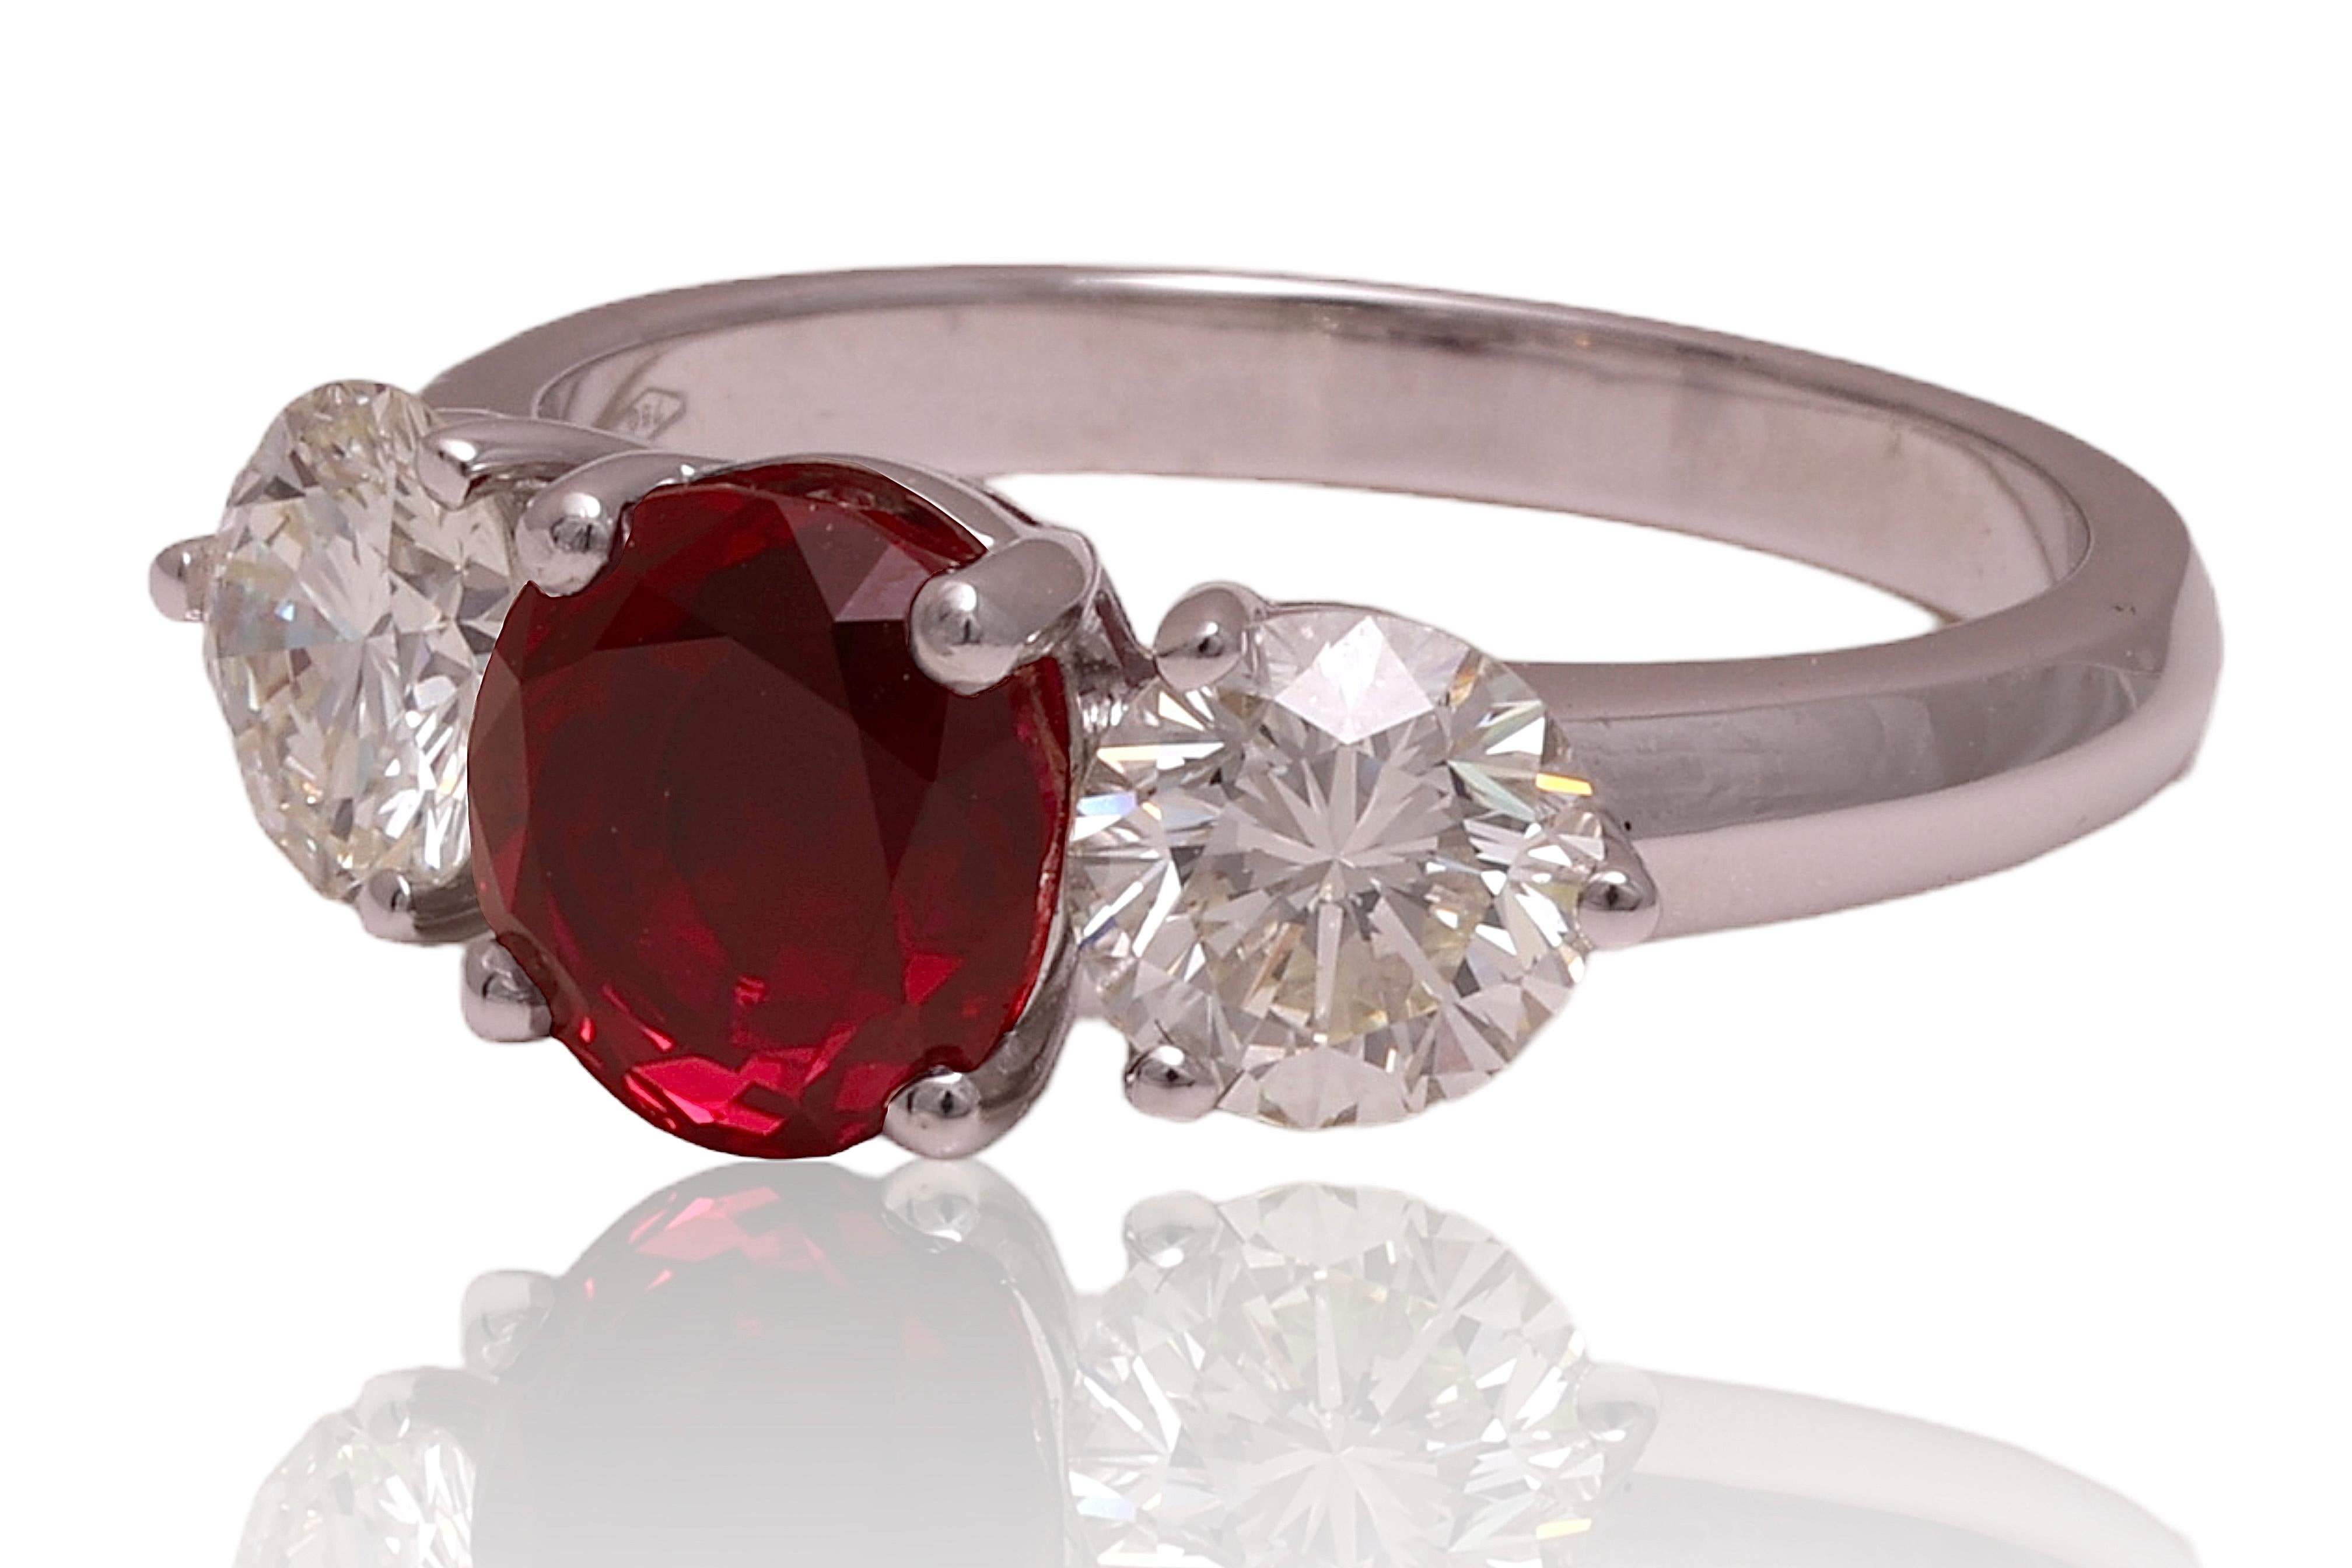 Gorgeous fine 18kt White Gold Ring With 2.19ct Burmese Mogok Pigeon Blood Ruby and 1.5ct Diamonds, With GRS Swiss certificate!

Ruby: Natural Burma Ruby, 2.19ct, Oval shape, Brilliant / Step cut, Vivid red Pigeon Blood comes with GRS